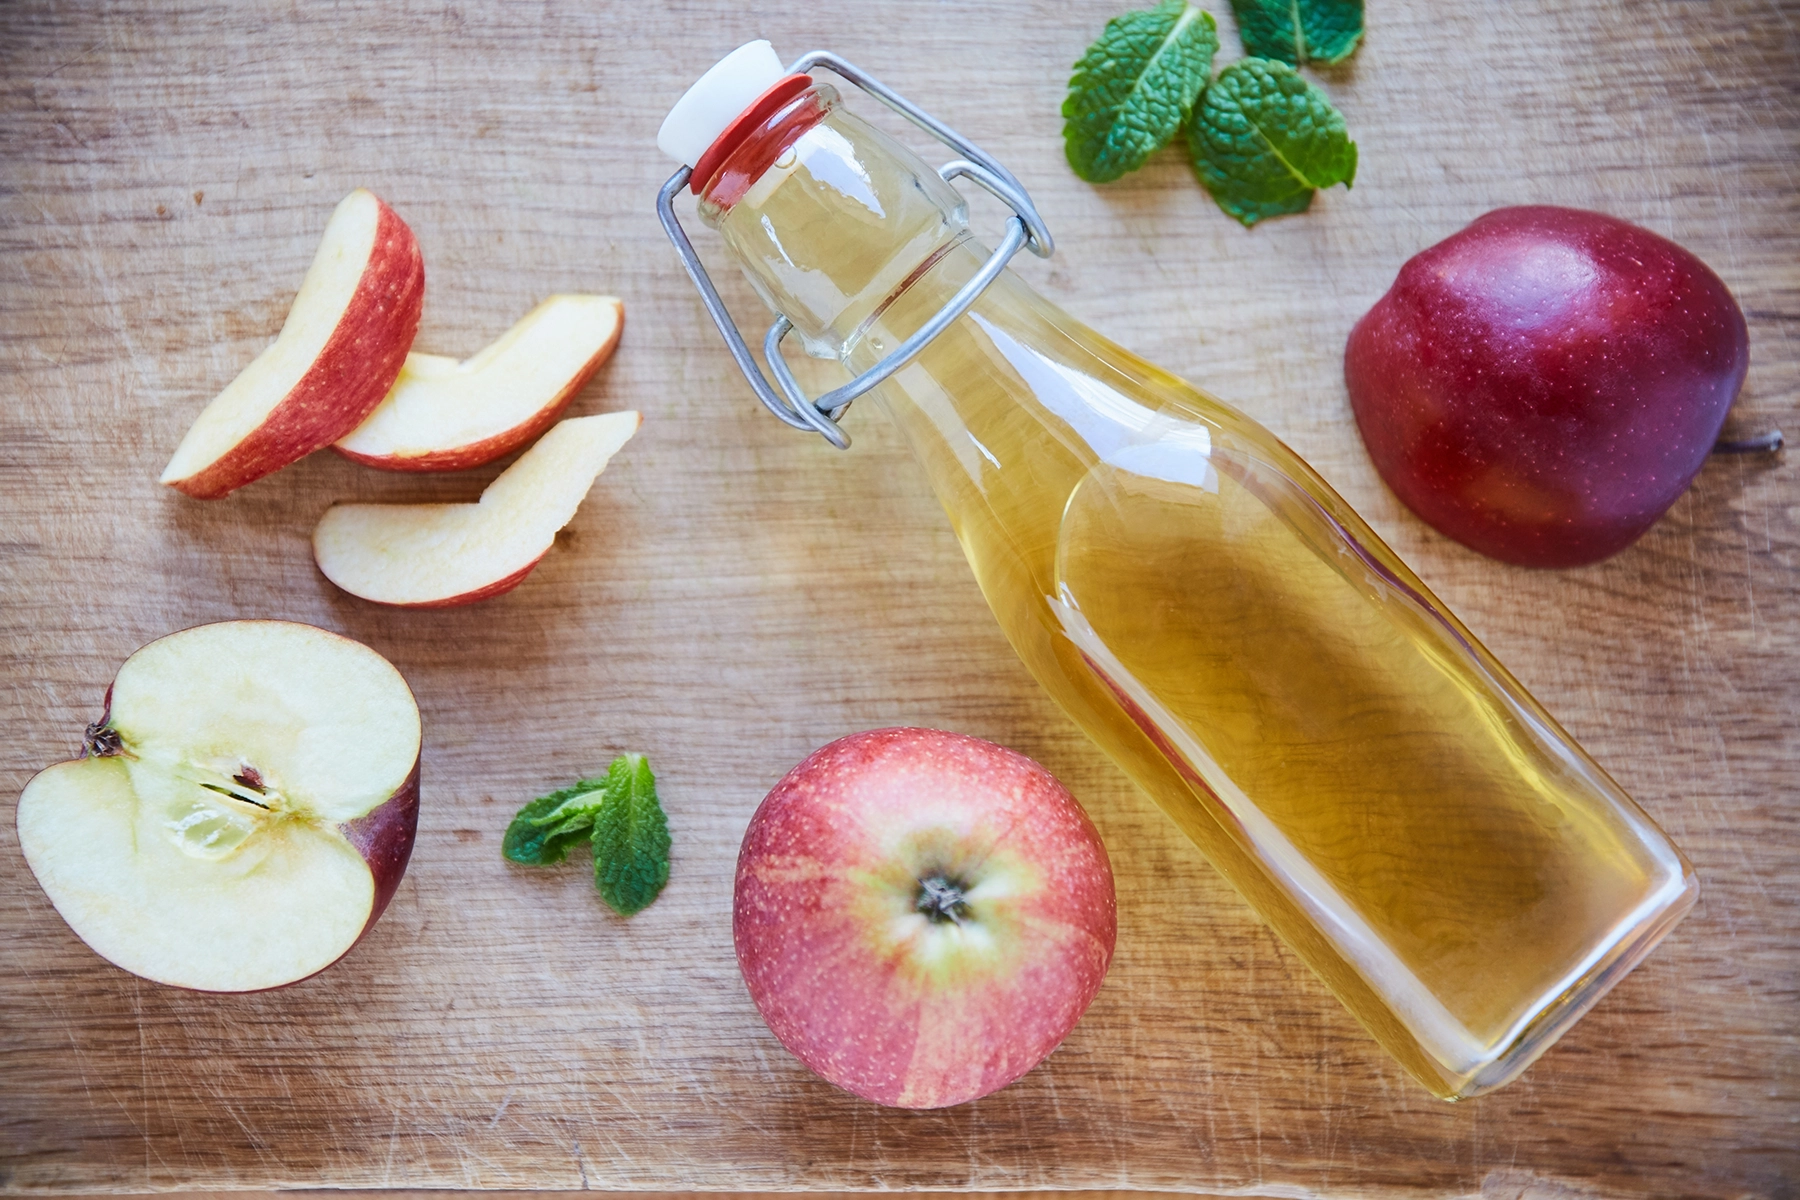 An overhead shot of a bottle of apple cider vinegar on a wooden table, surrounded by apples.